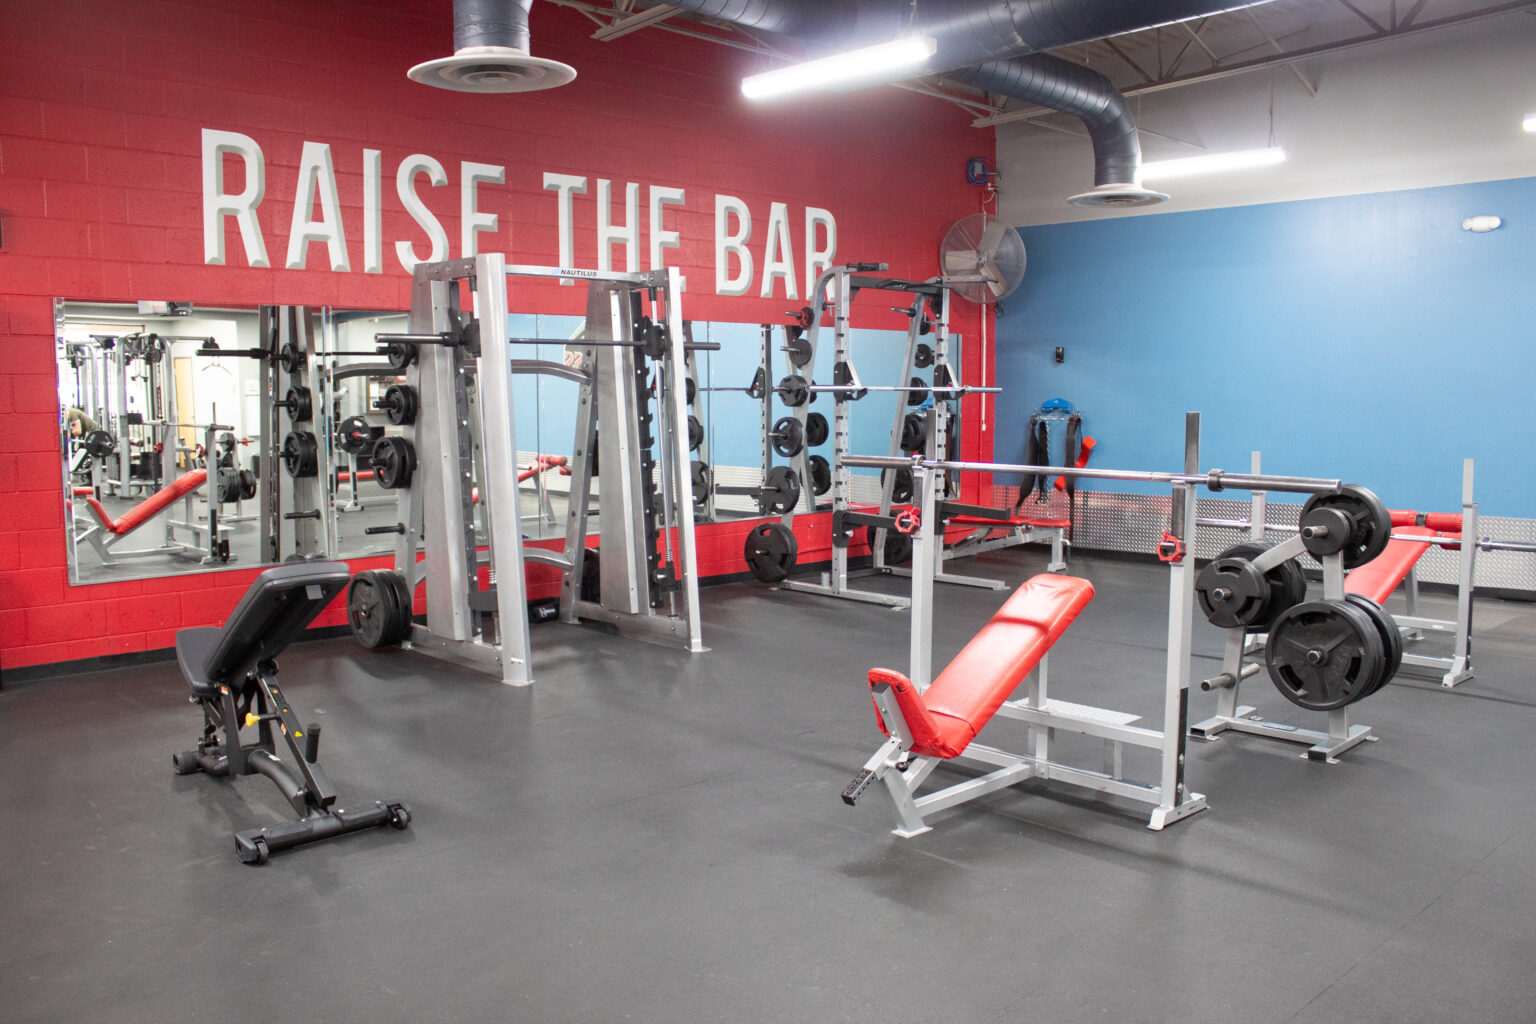 Idaho Fitness Factory Franklin has received new equipment and facility updates